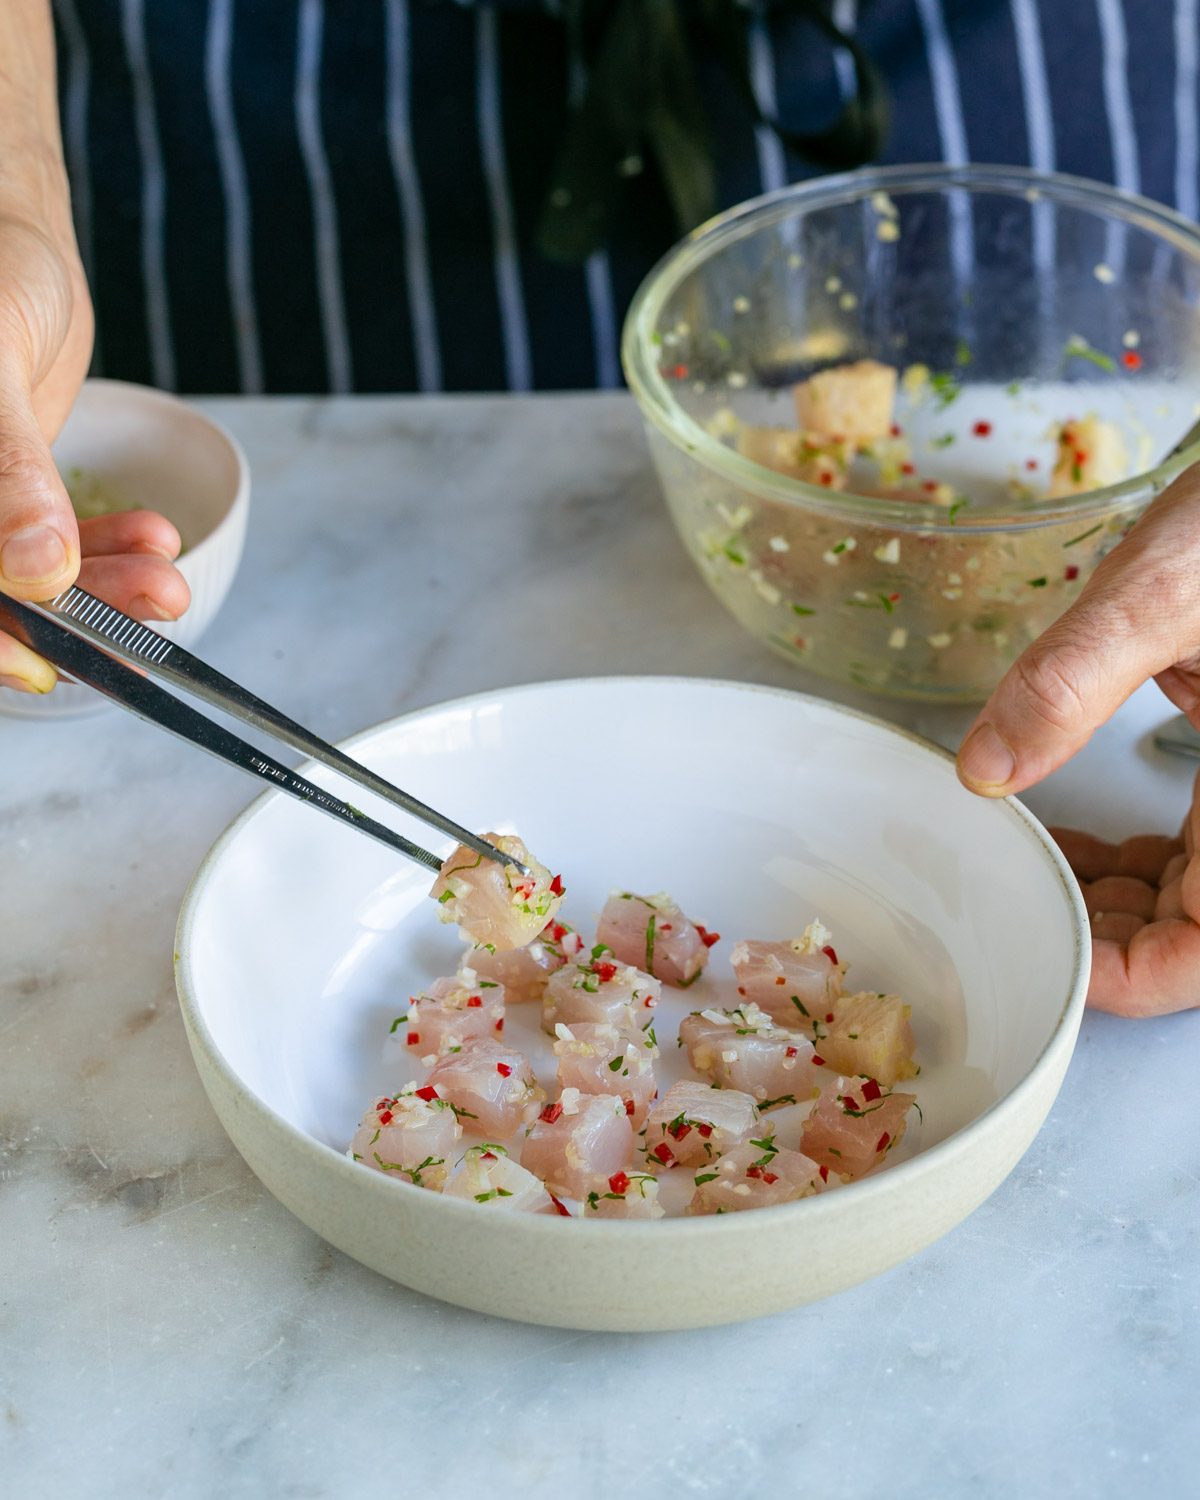 Placing the marinated hamachi cubes in a bowl with tweezers